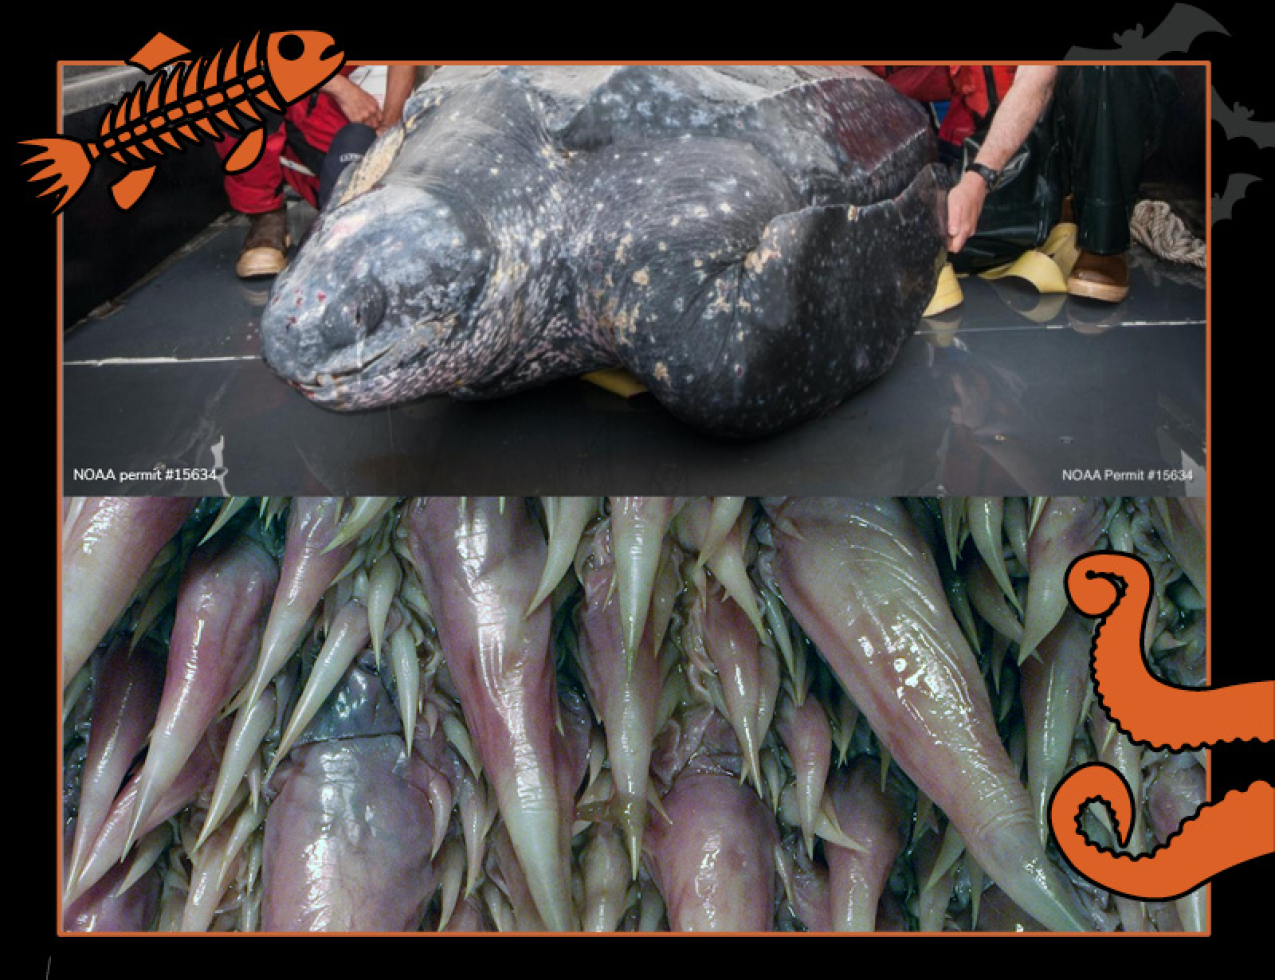 Top image: Leatherback sea turtle on board a research vessel. Permit #15634. Bottom image: Spiky-looking papillae that cover the inside of leatherback sea turtle throats. Border of the photo is black with orange sea creature graphics of octopus tentacles and a fish skeleton. Text: Leatherback sea turtle throat, #NOAASpookyScience with NOAA logo.